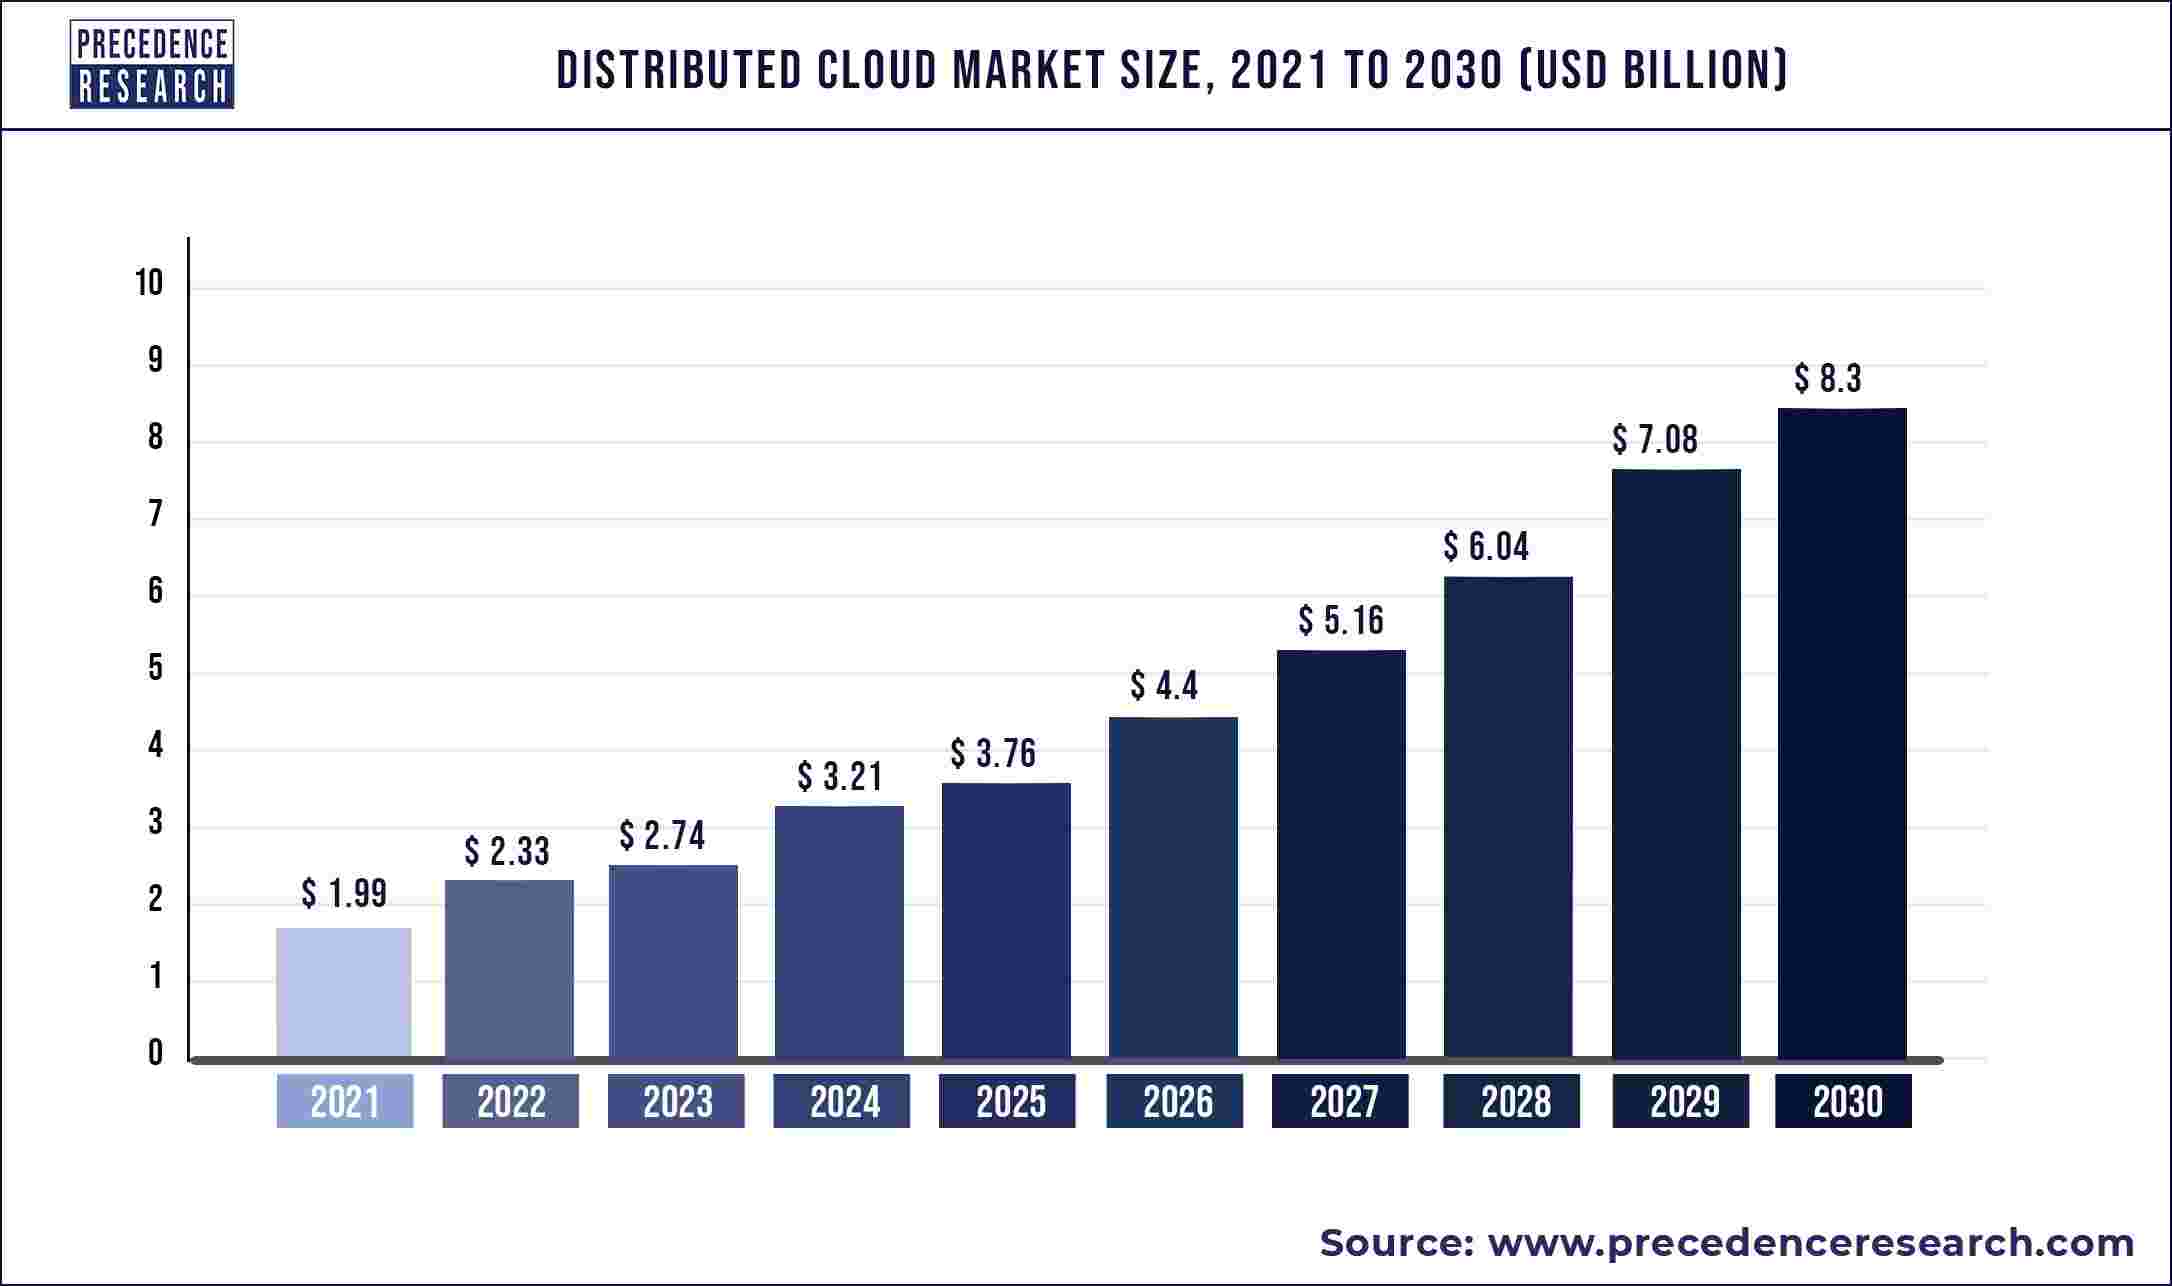 Distributed Cloud